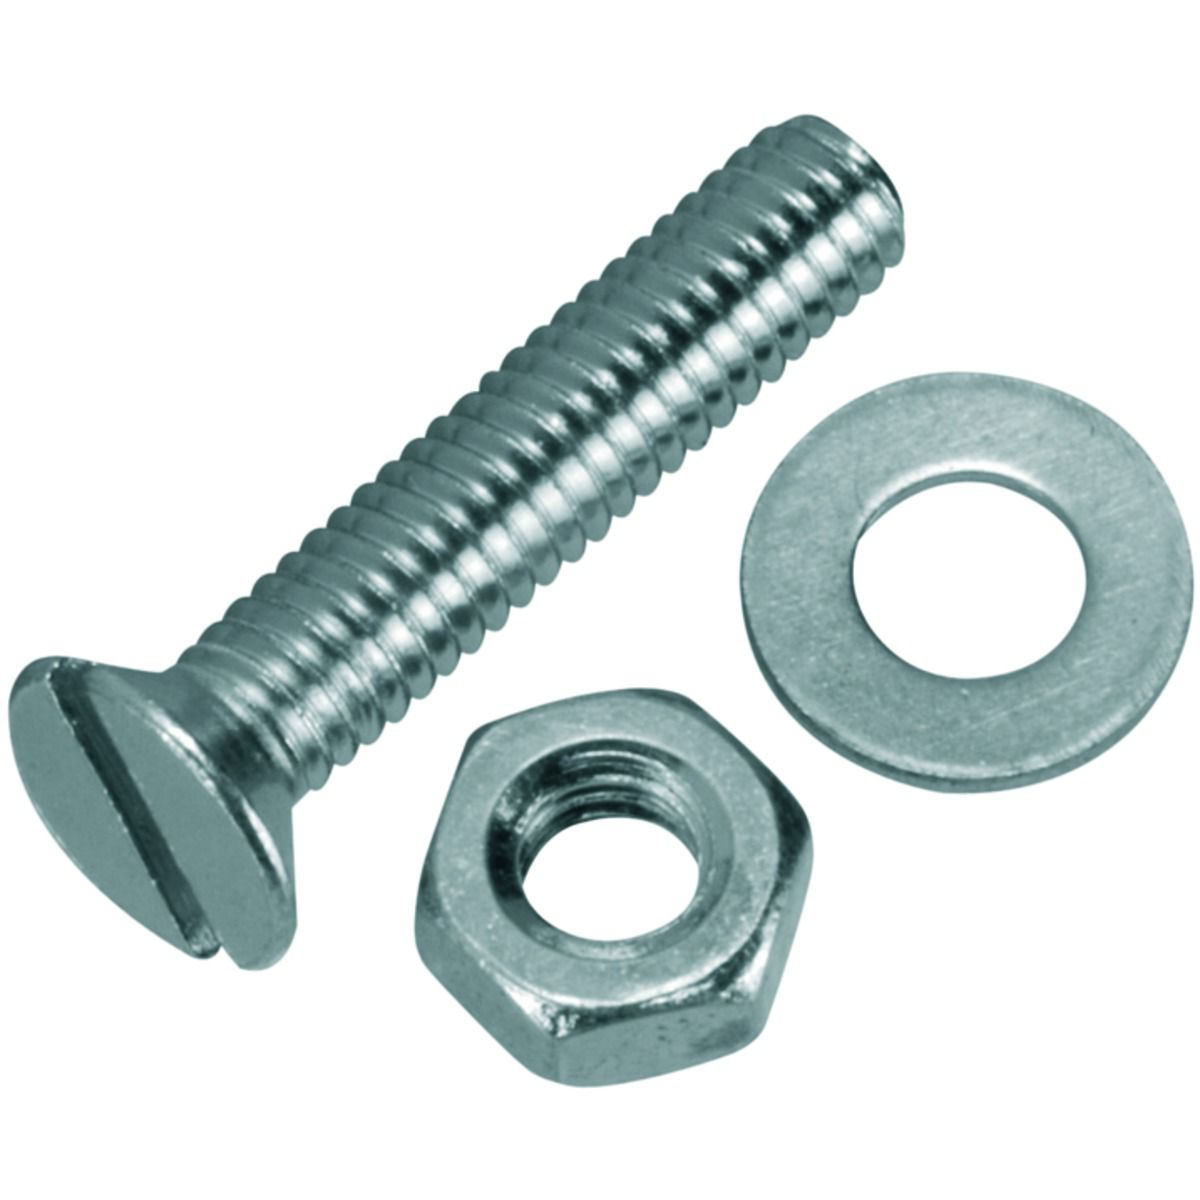 Image of Wickes Machine Screws with Slot Head, Nut & Washer - M4 x 20mm Pack of 10